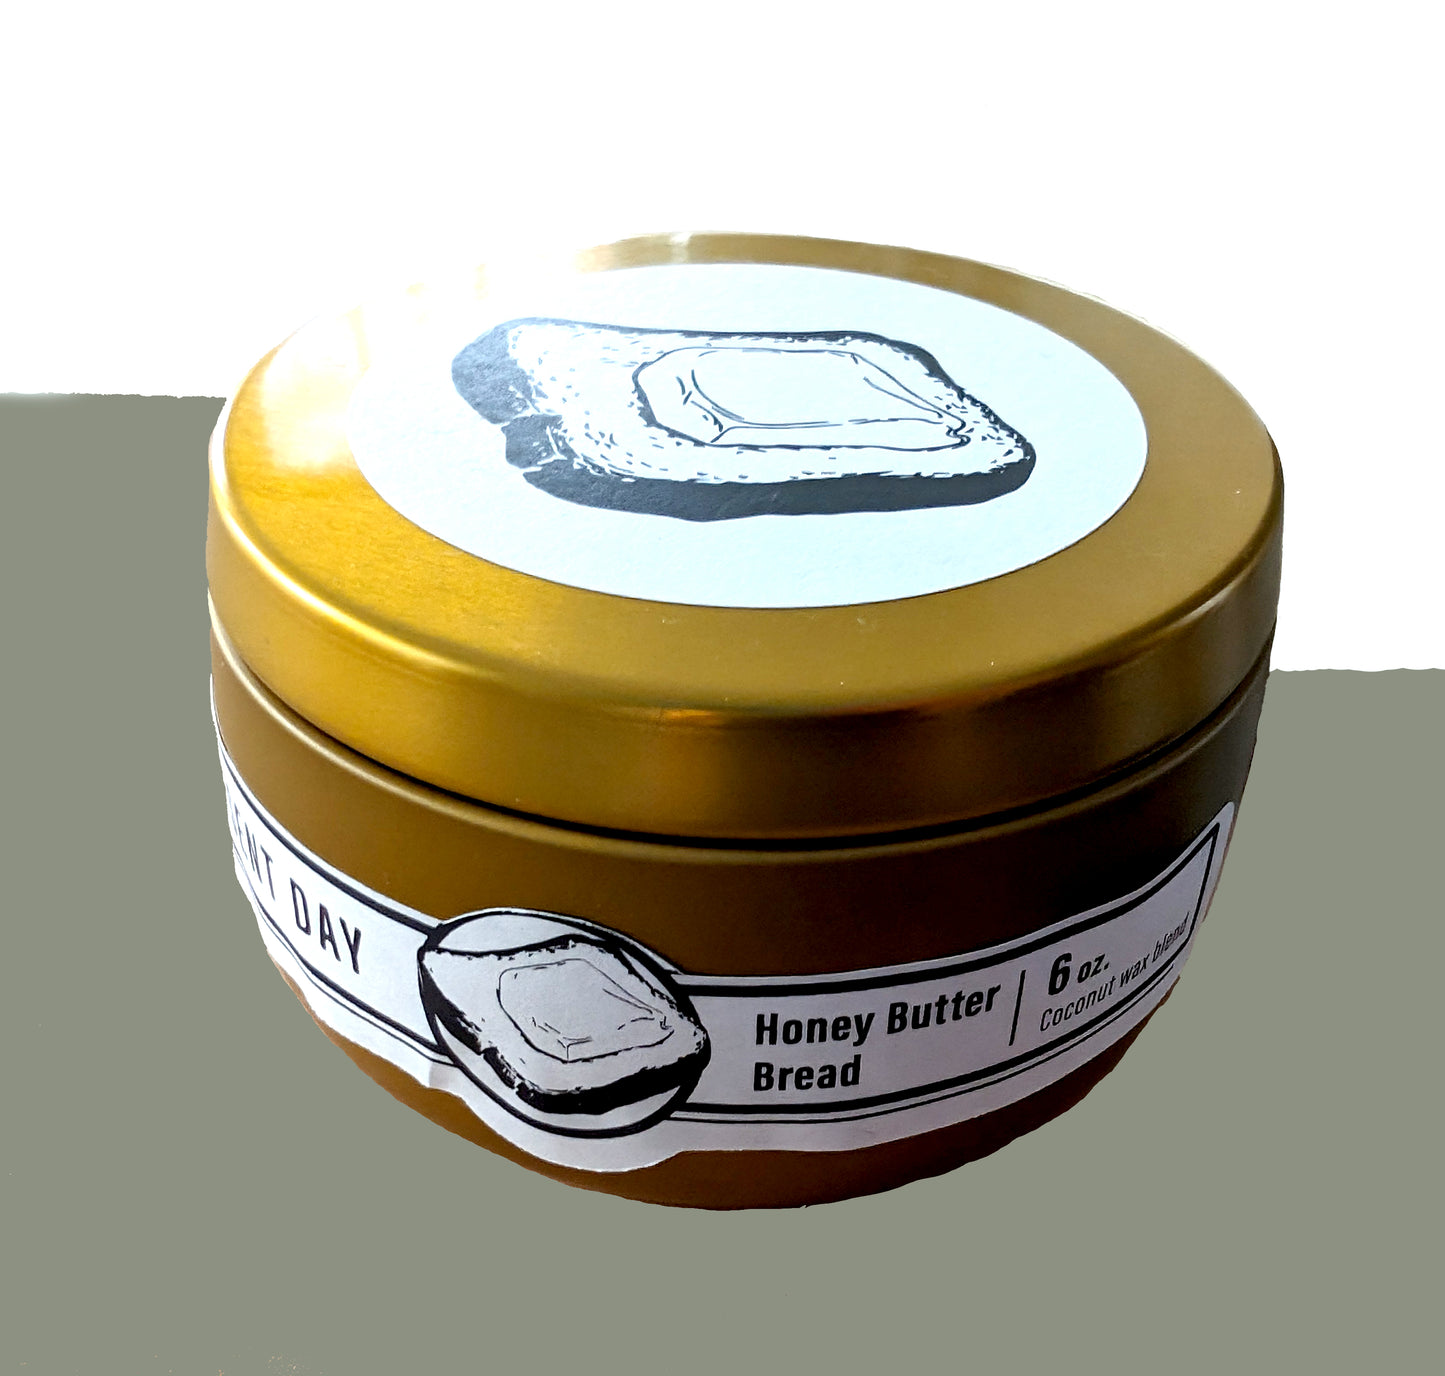 Honey Butter Bread Candle Gift Tin, 6 oz.